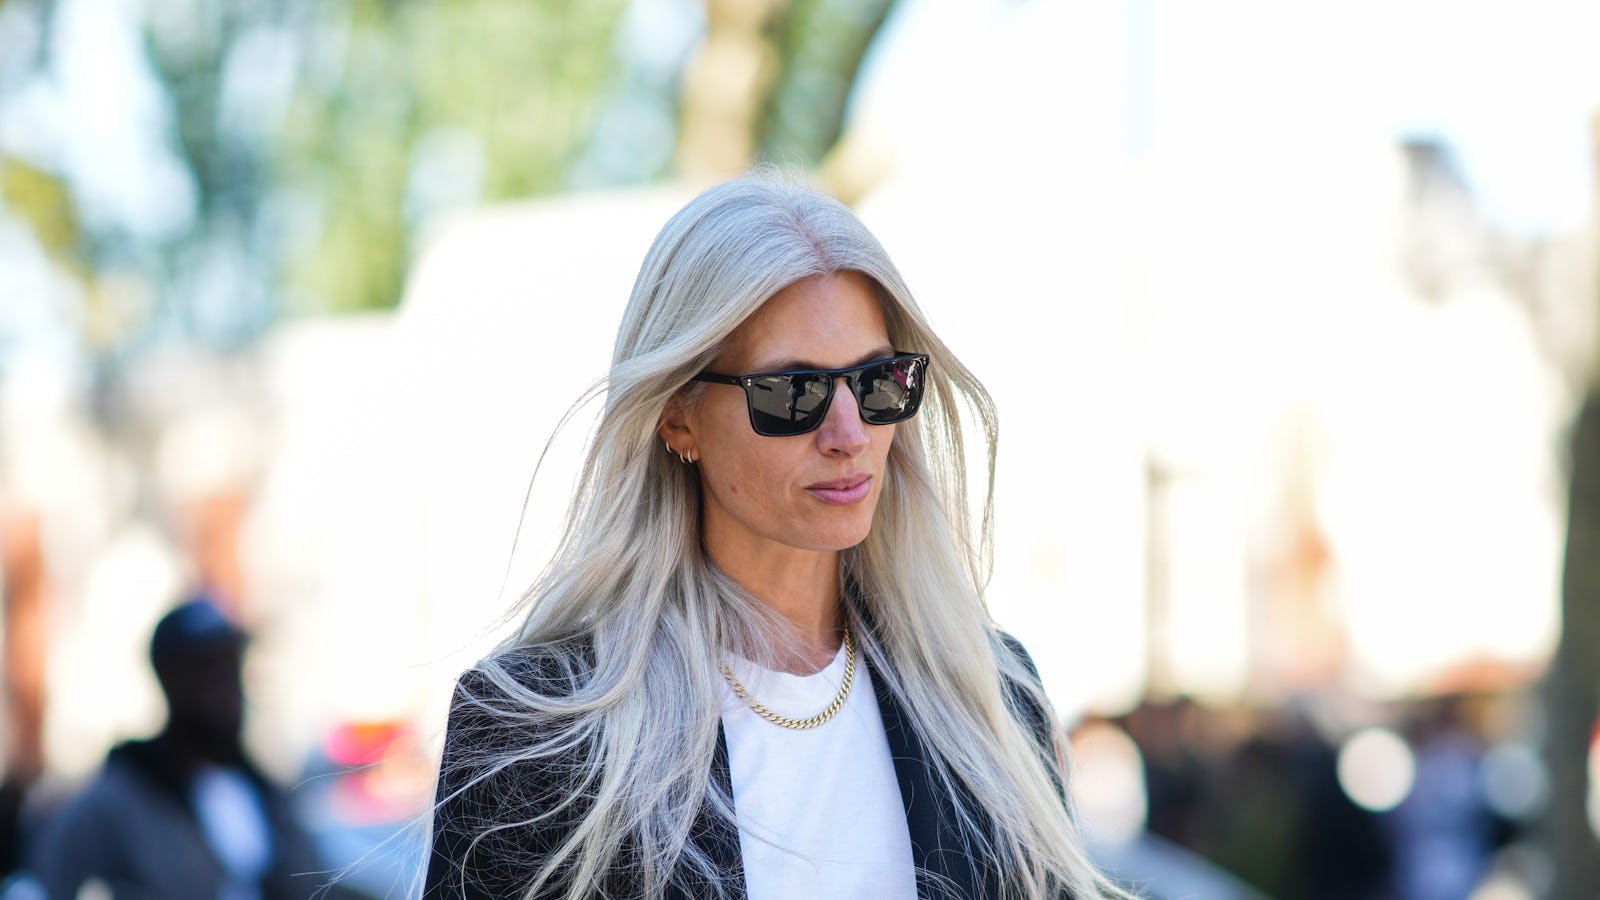 This Low-Maintenance Highlight Technique Helps Gray Hair Look *So* Luminous